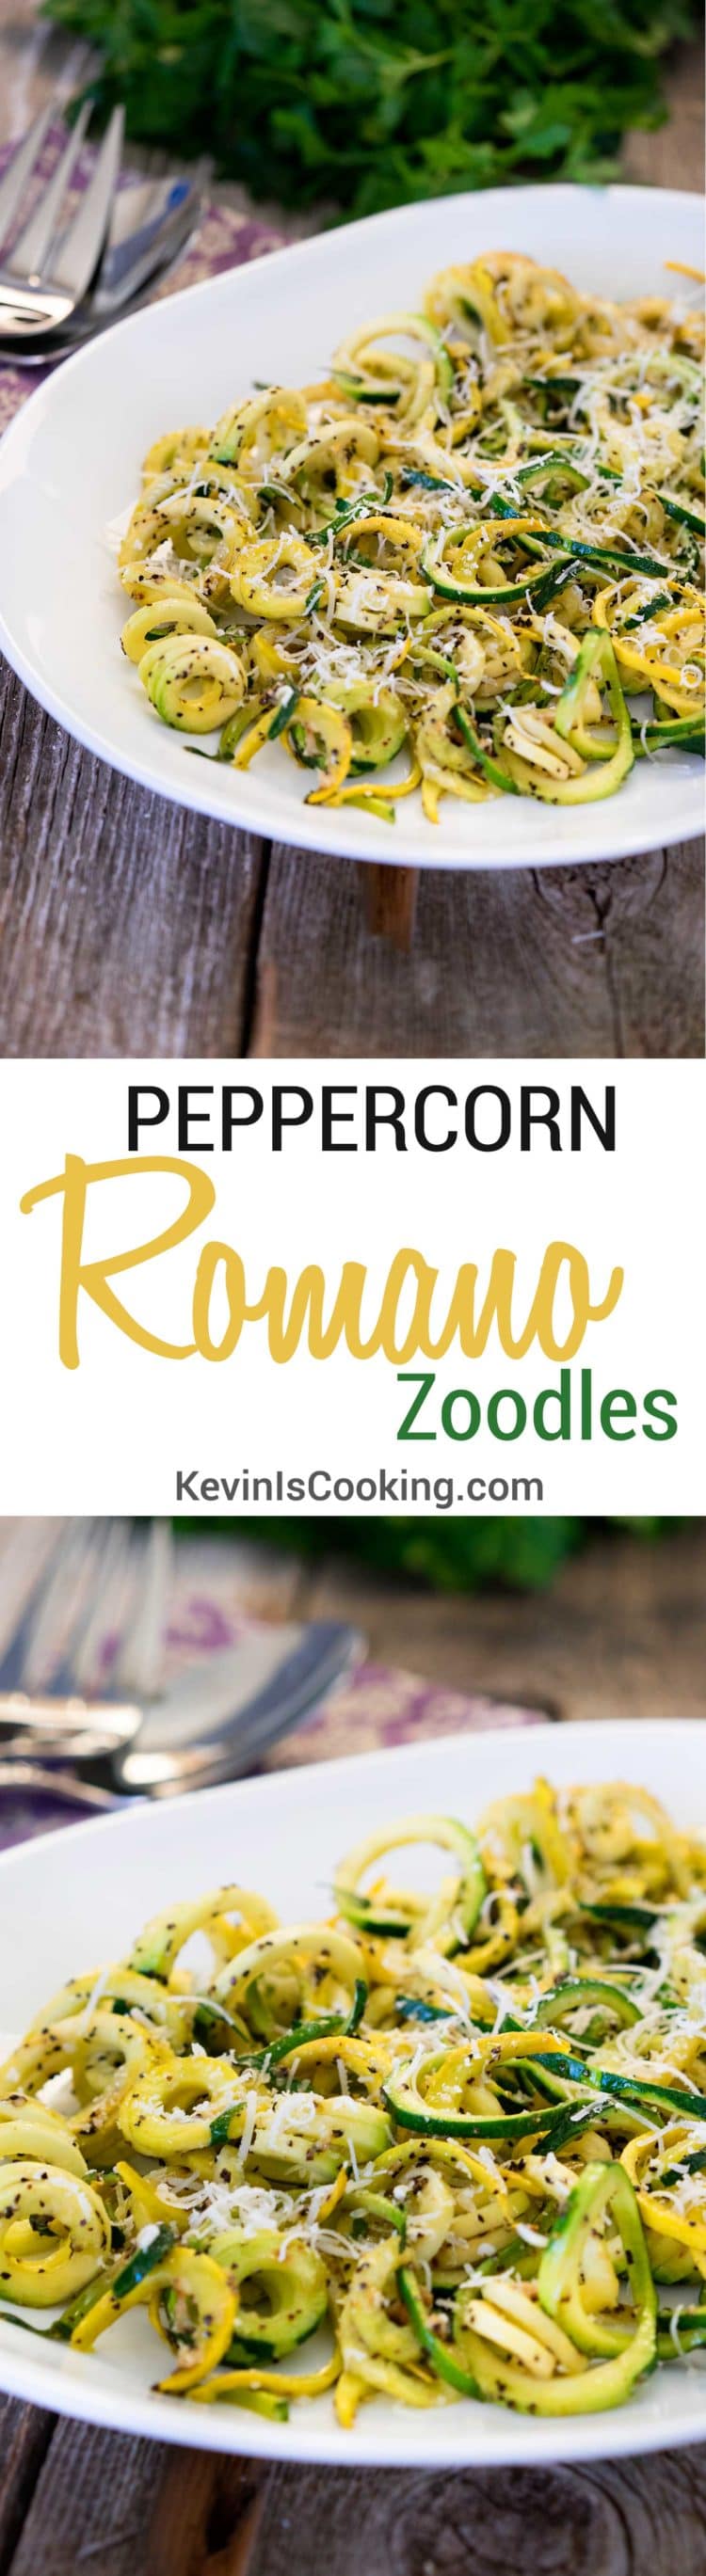 Peppercorn Romano Zoodles. www.keviniscooking.com